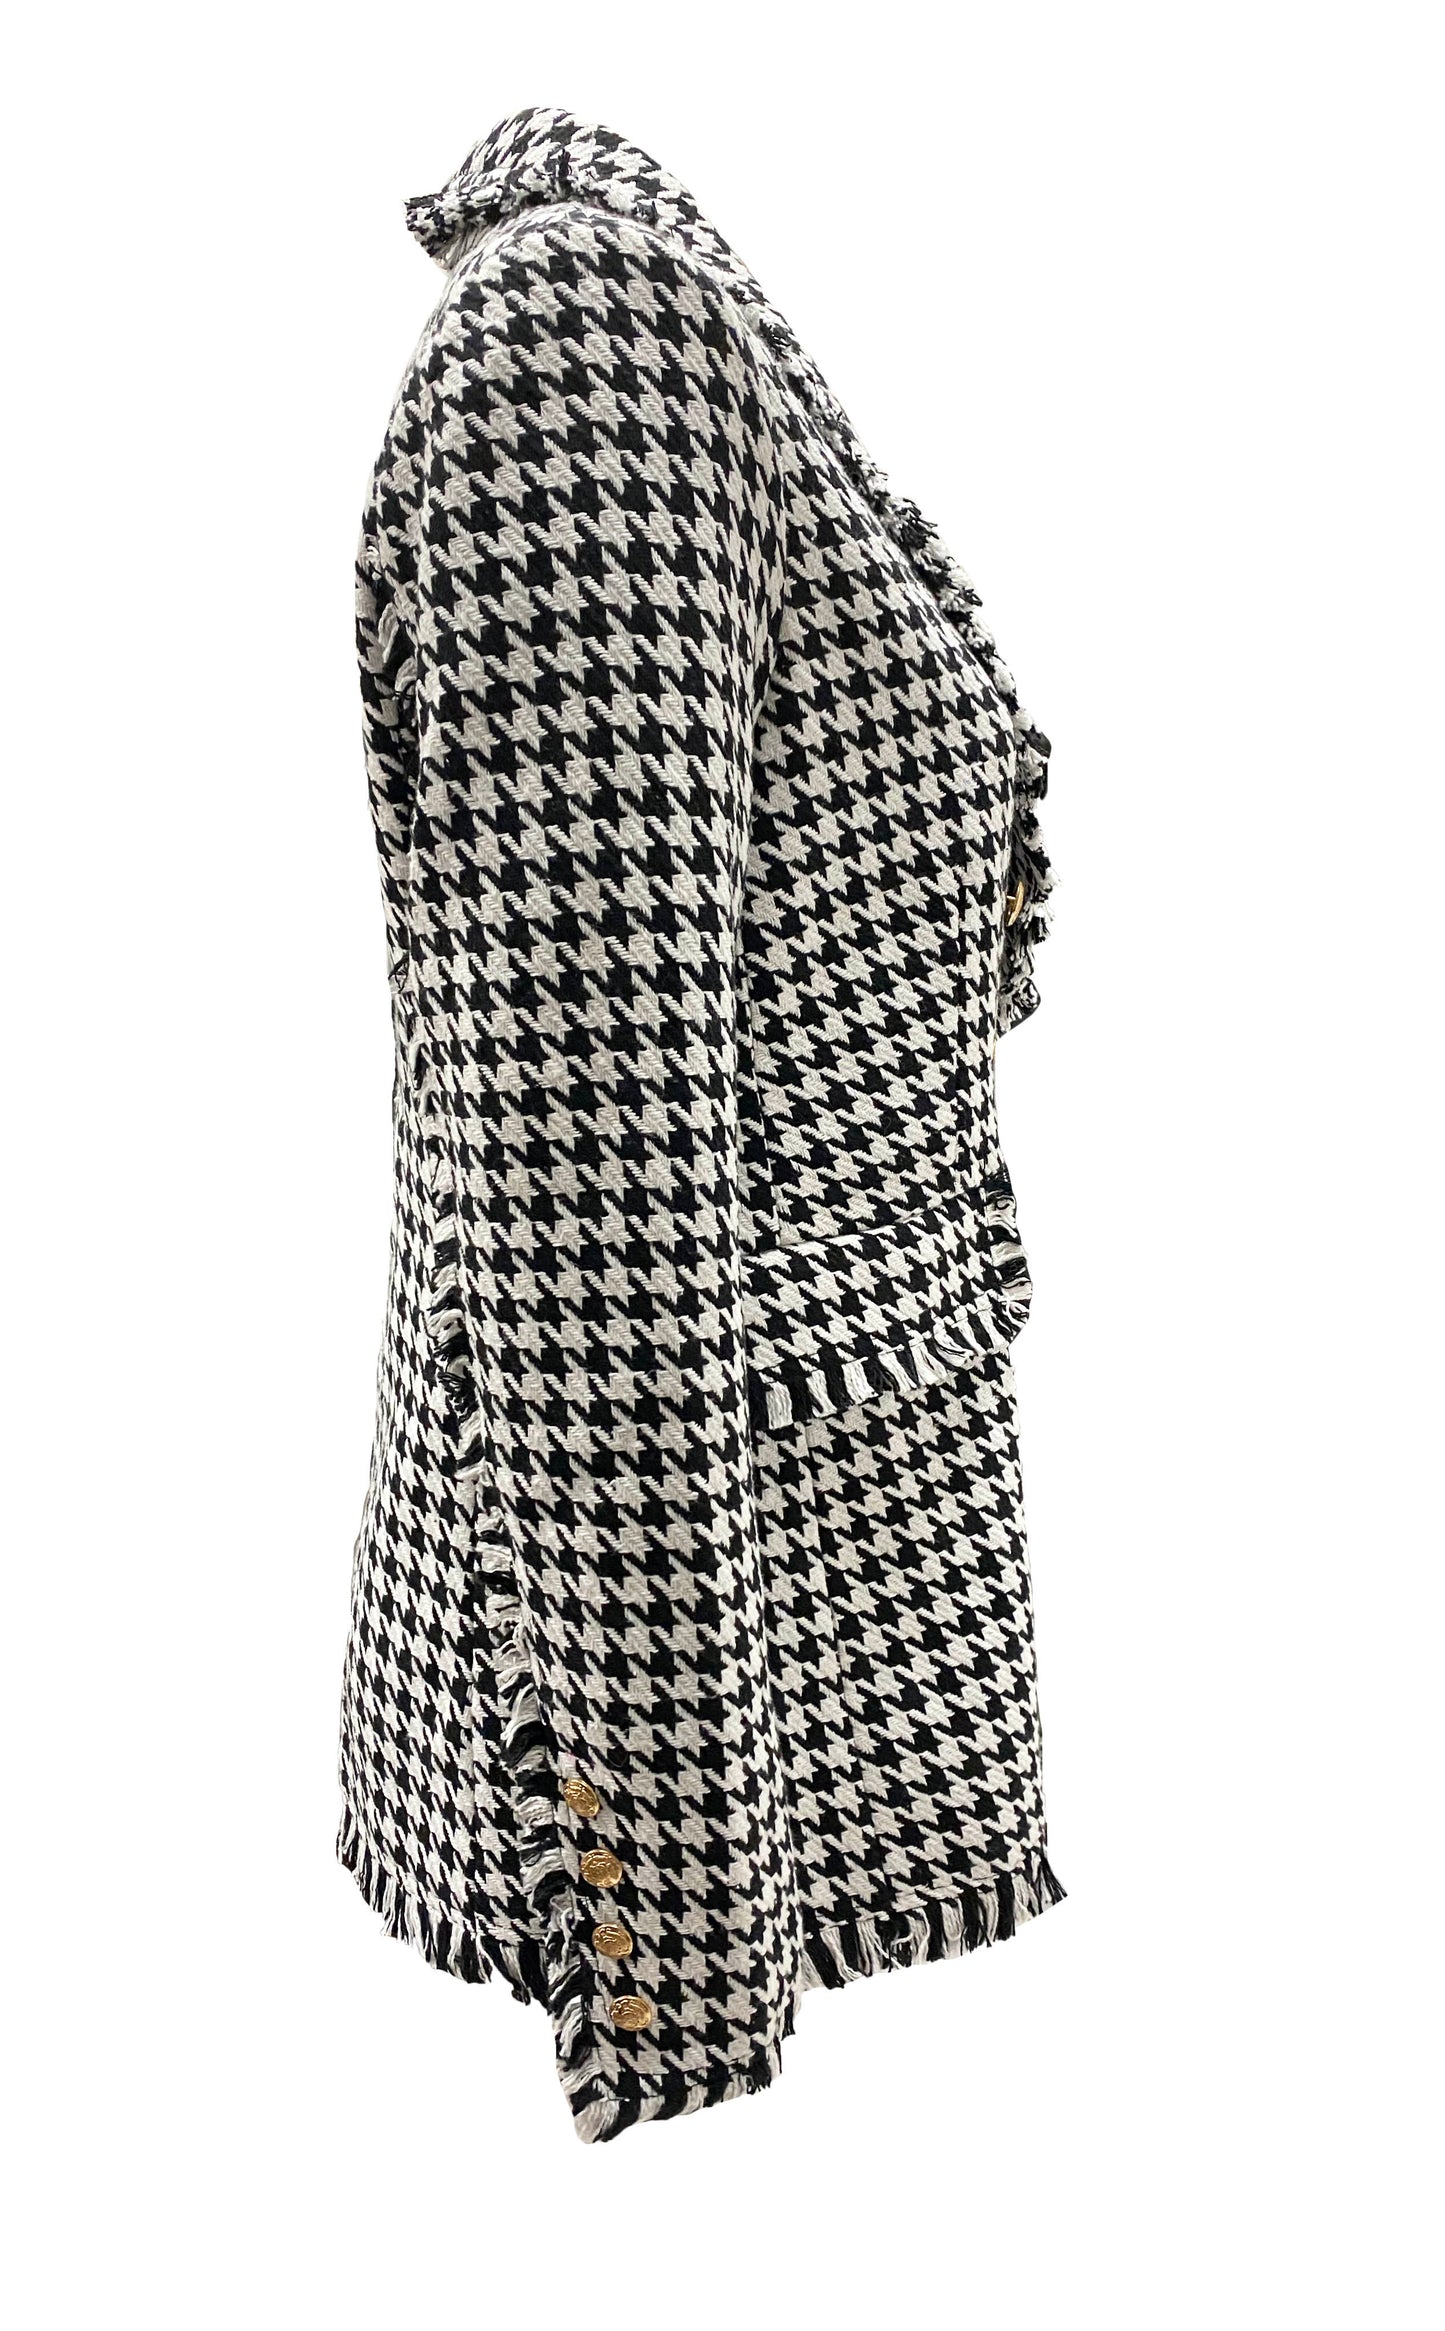 Load image into Gallery viewer, Double- Breasted Houndstooth Fringe Blazer
